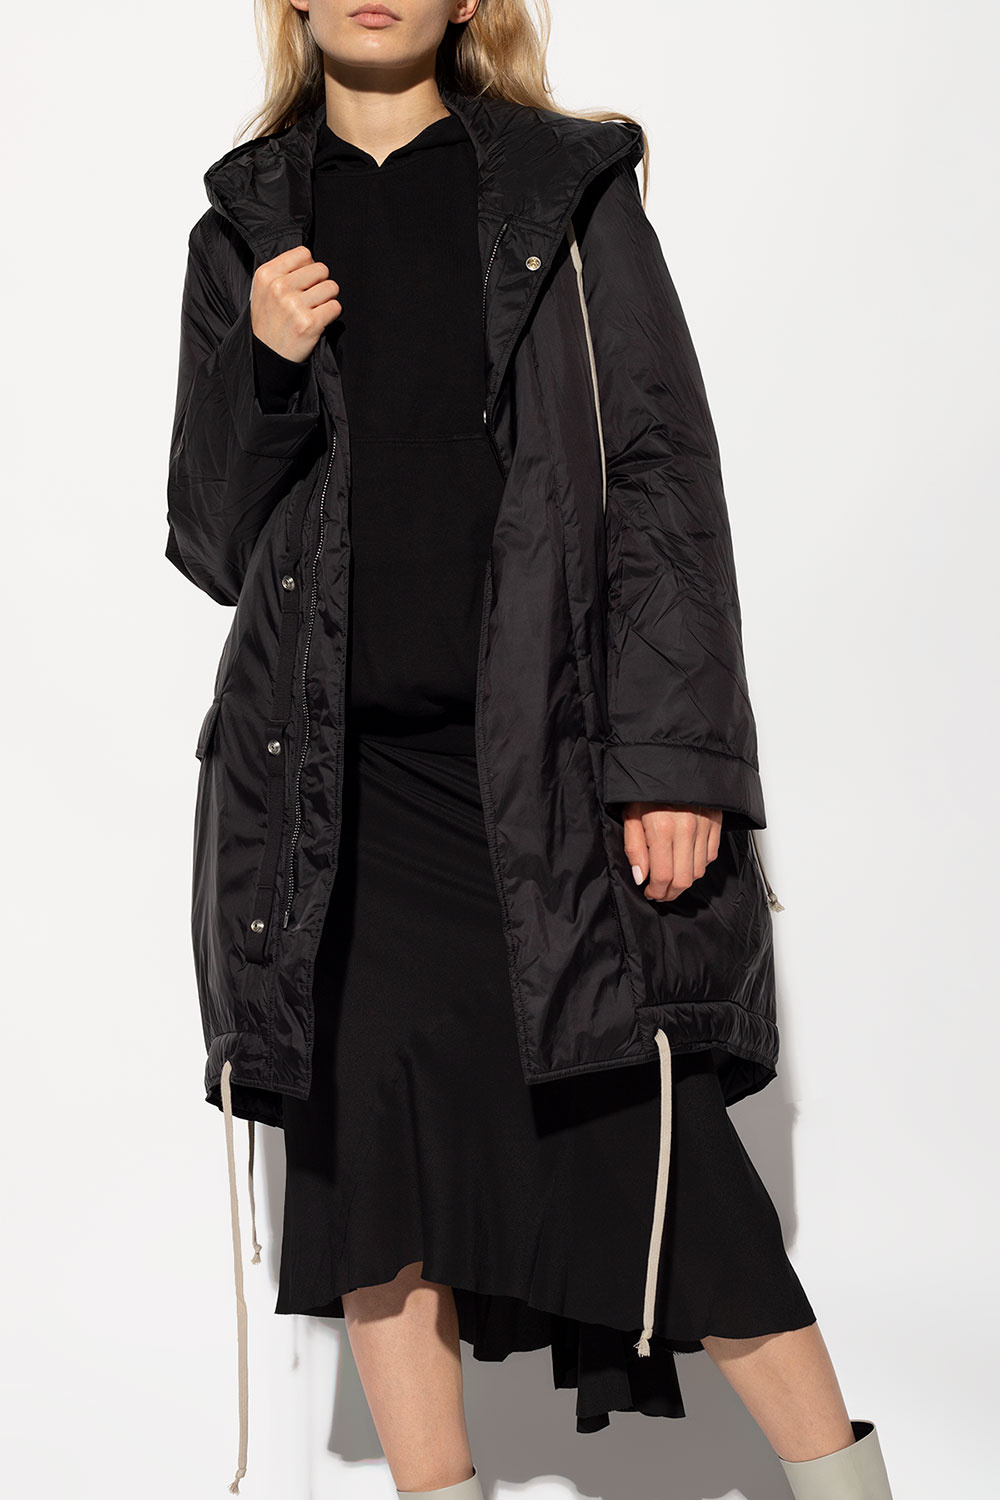 Frequently asked questions Hooded coat